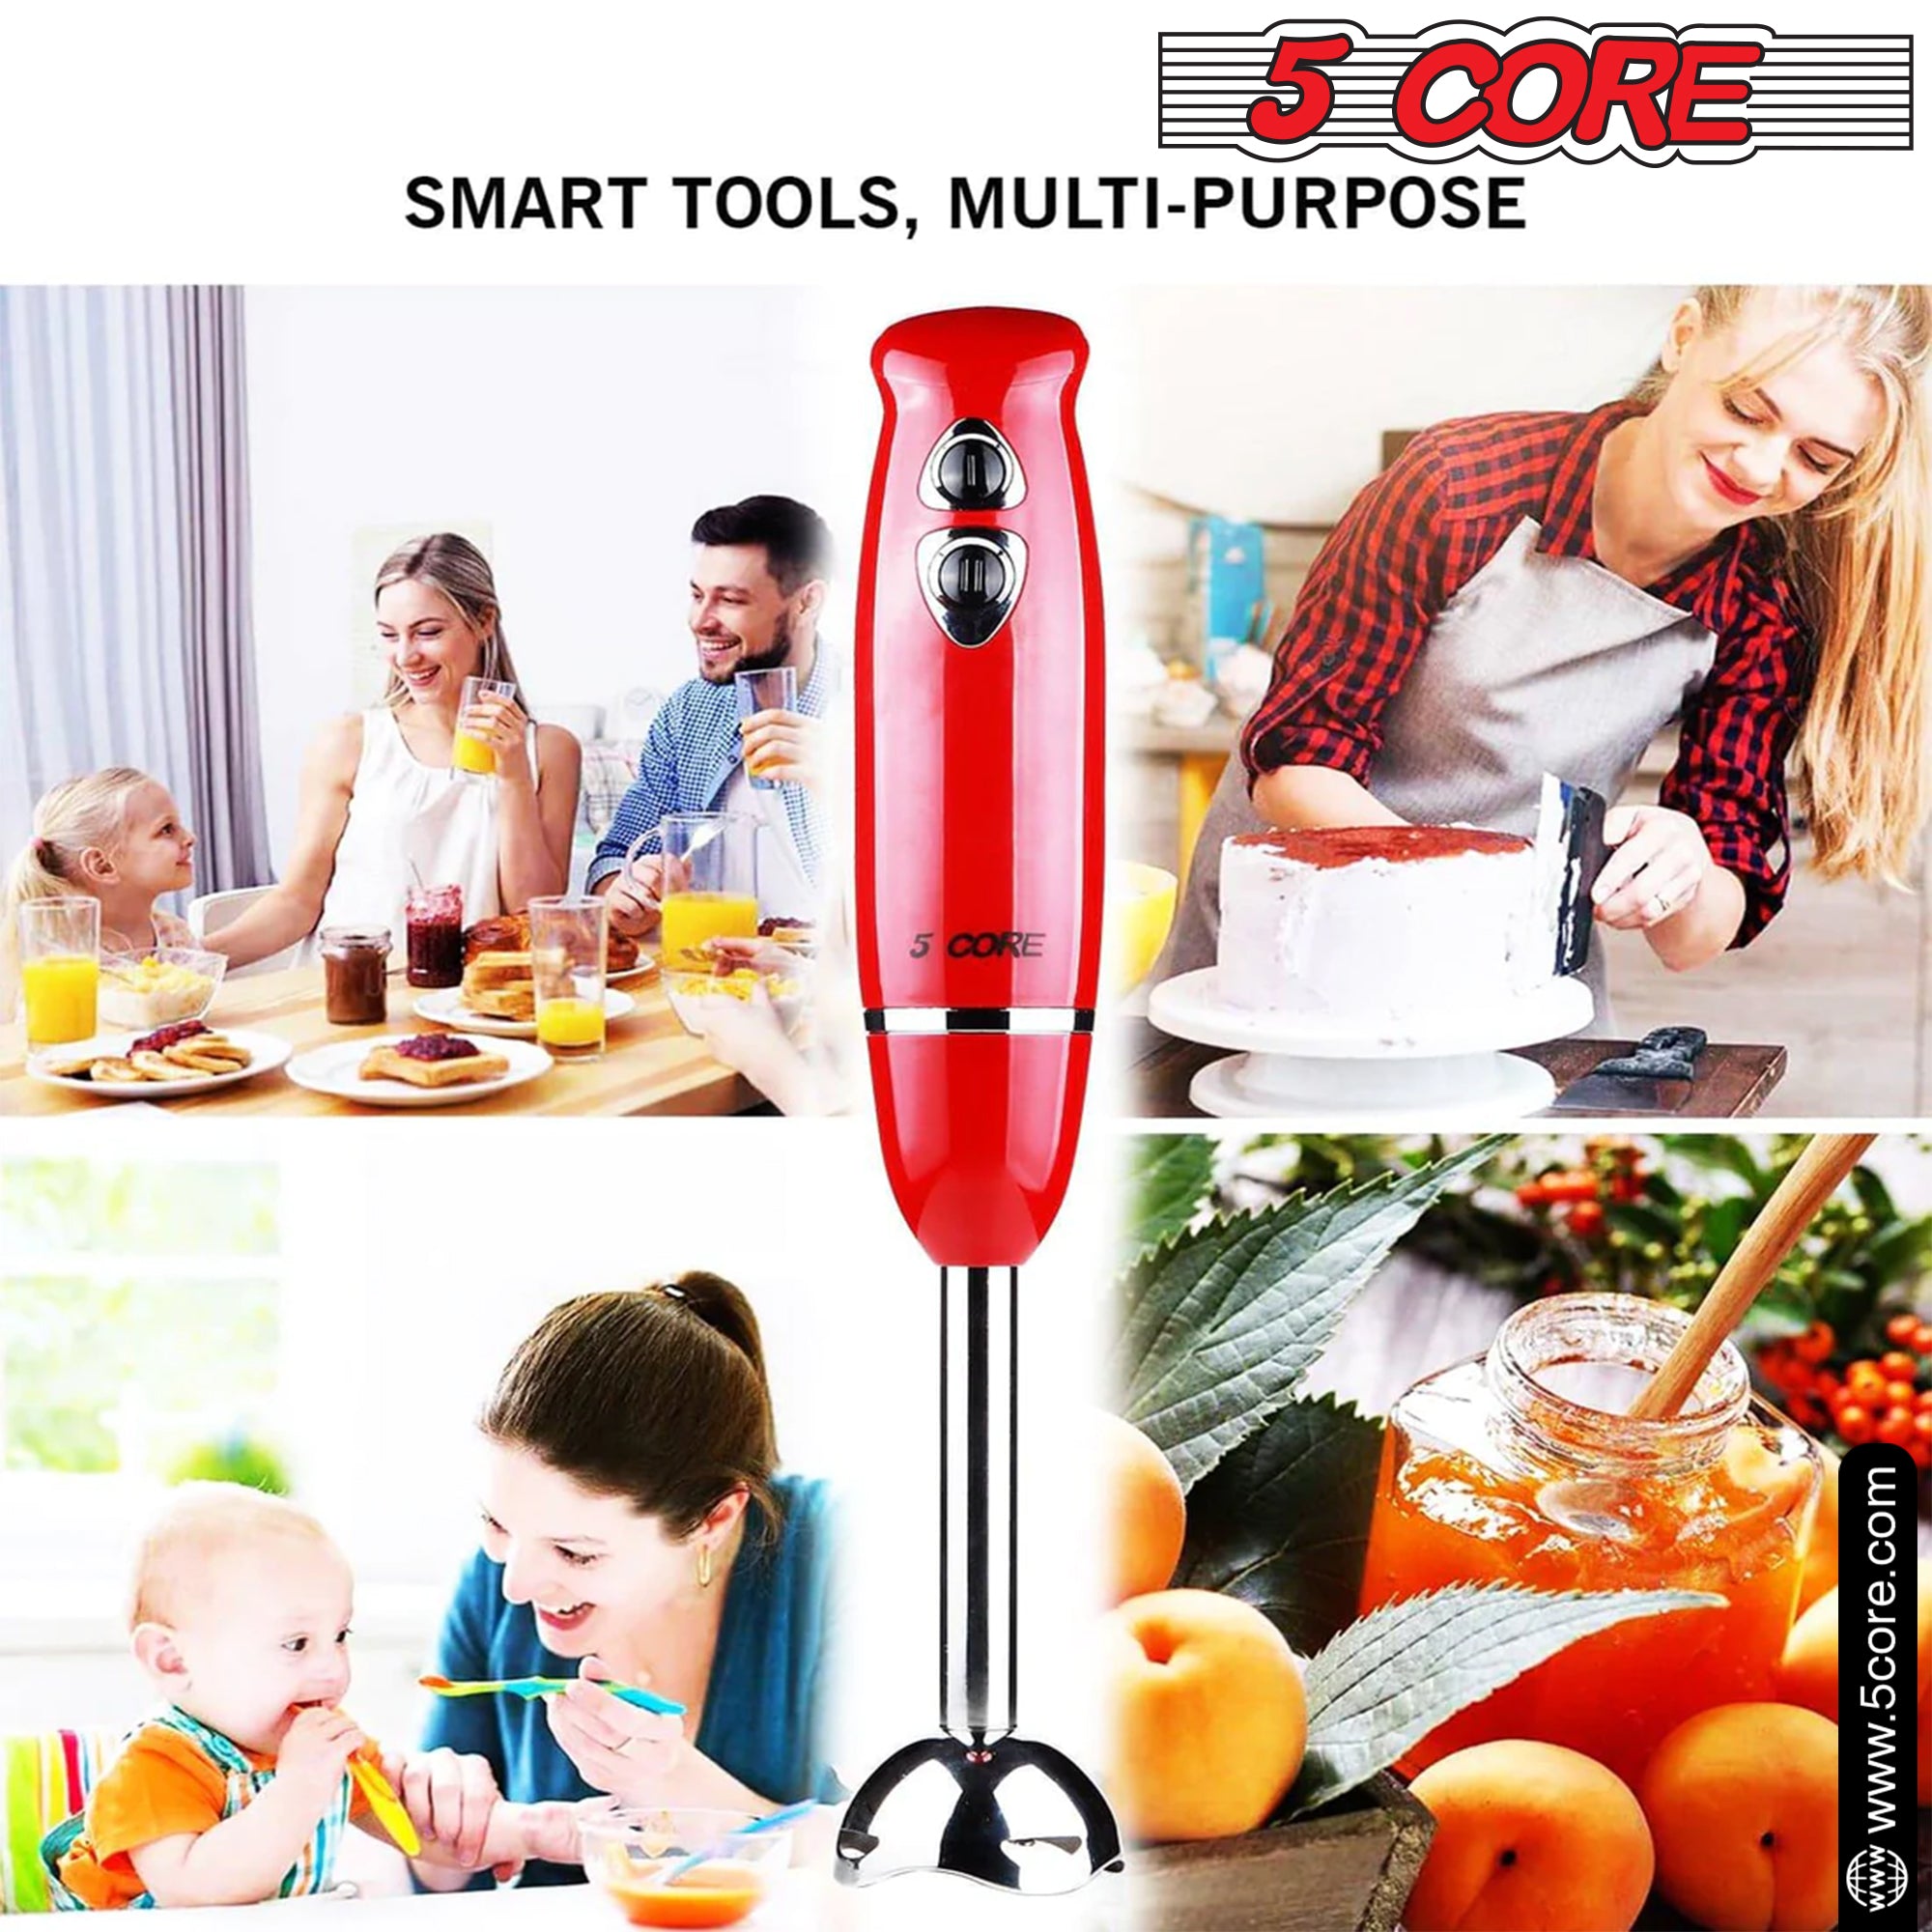 5 Core Hand Blender • 500W Immersion Blender • Electric Hand Mixer w 2 Mixing Speed 304 Steel Blades